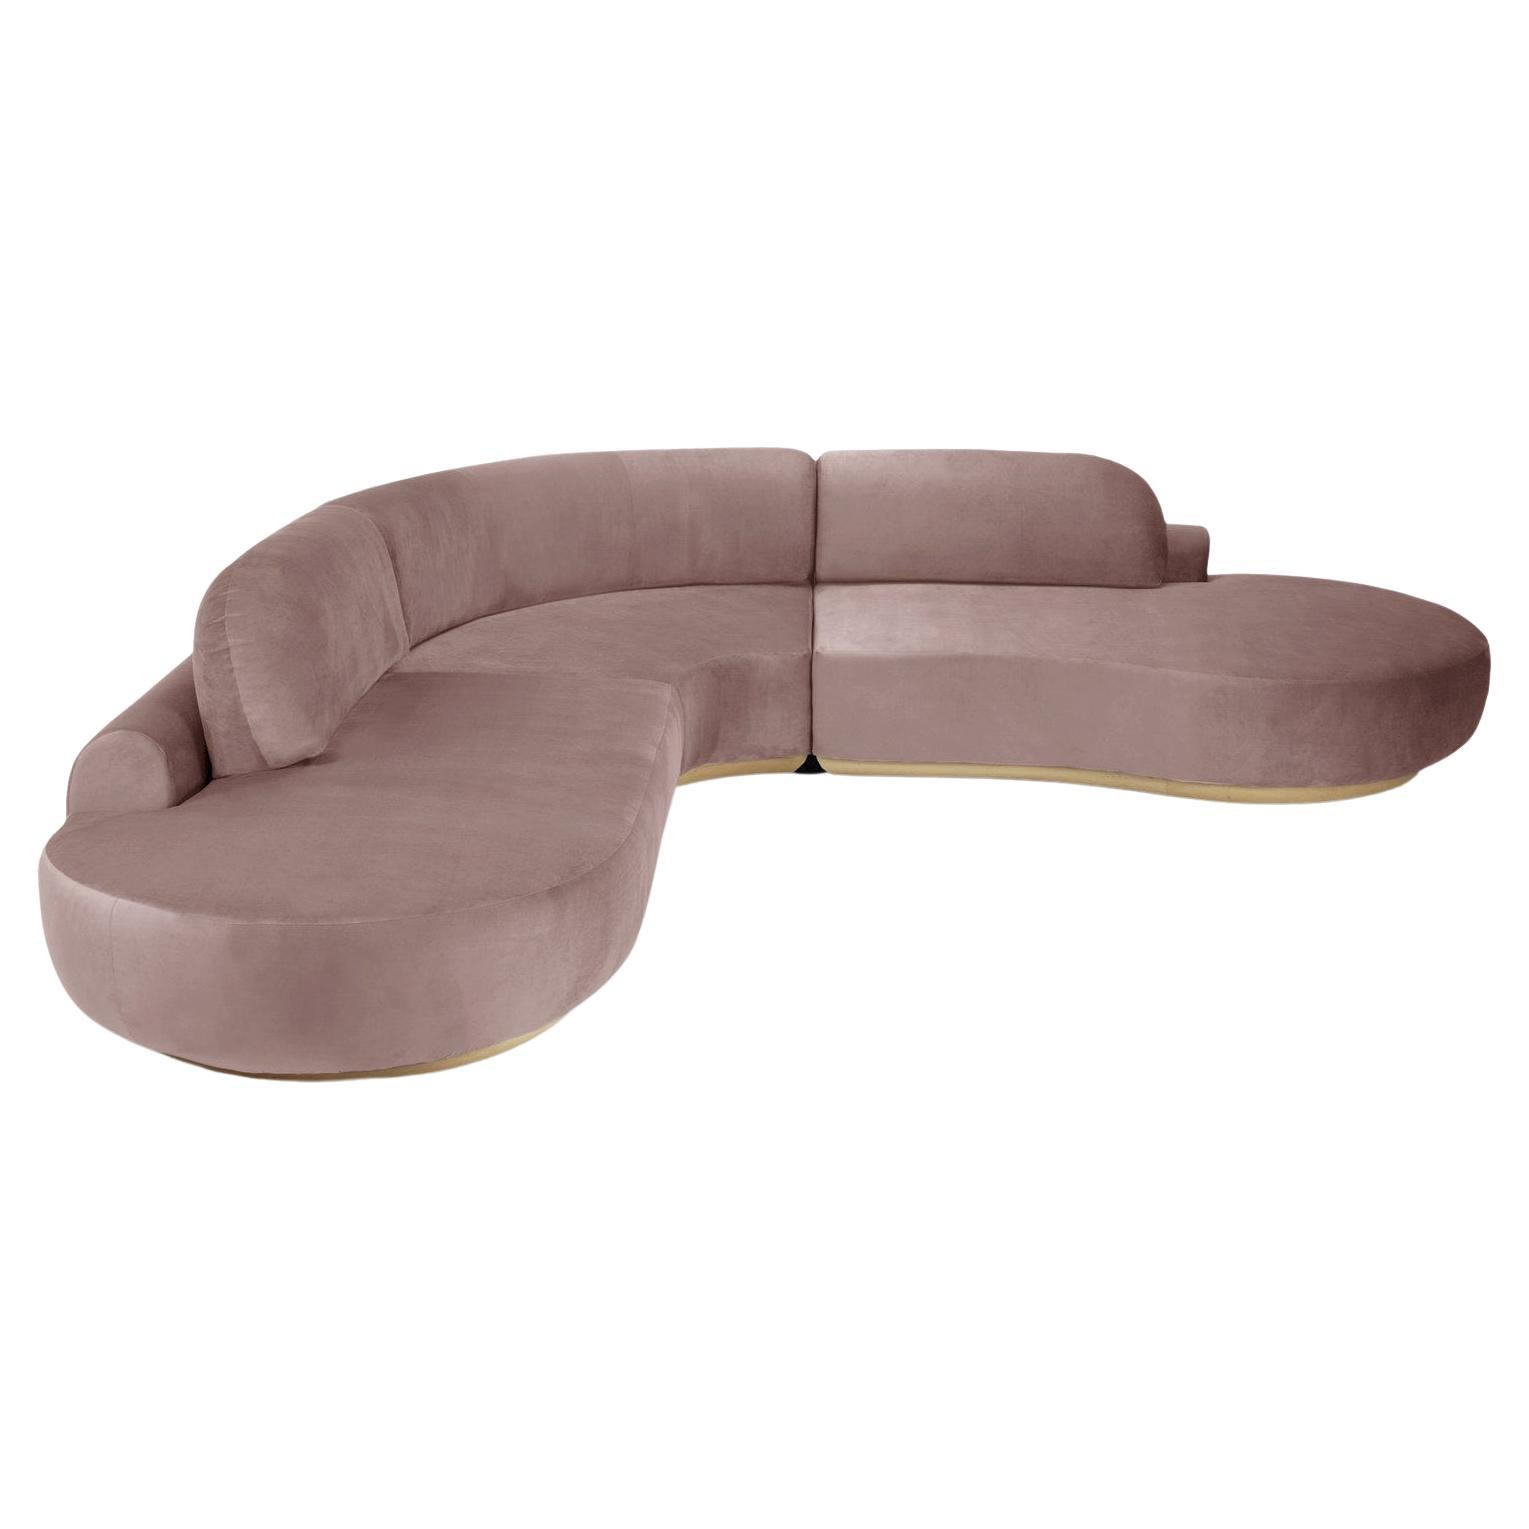 Naked Curved Sectional Sofa, 3 Piece with Natural Oak and Barcelona Lotus